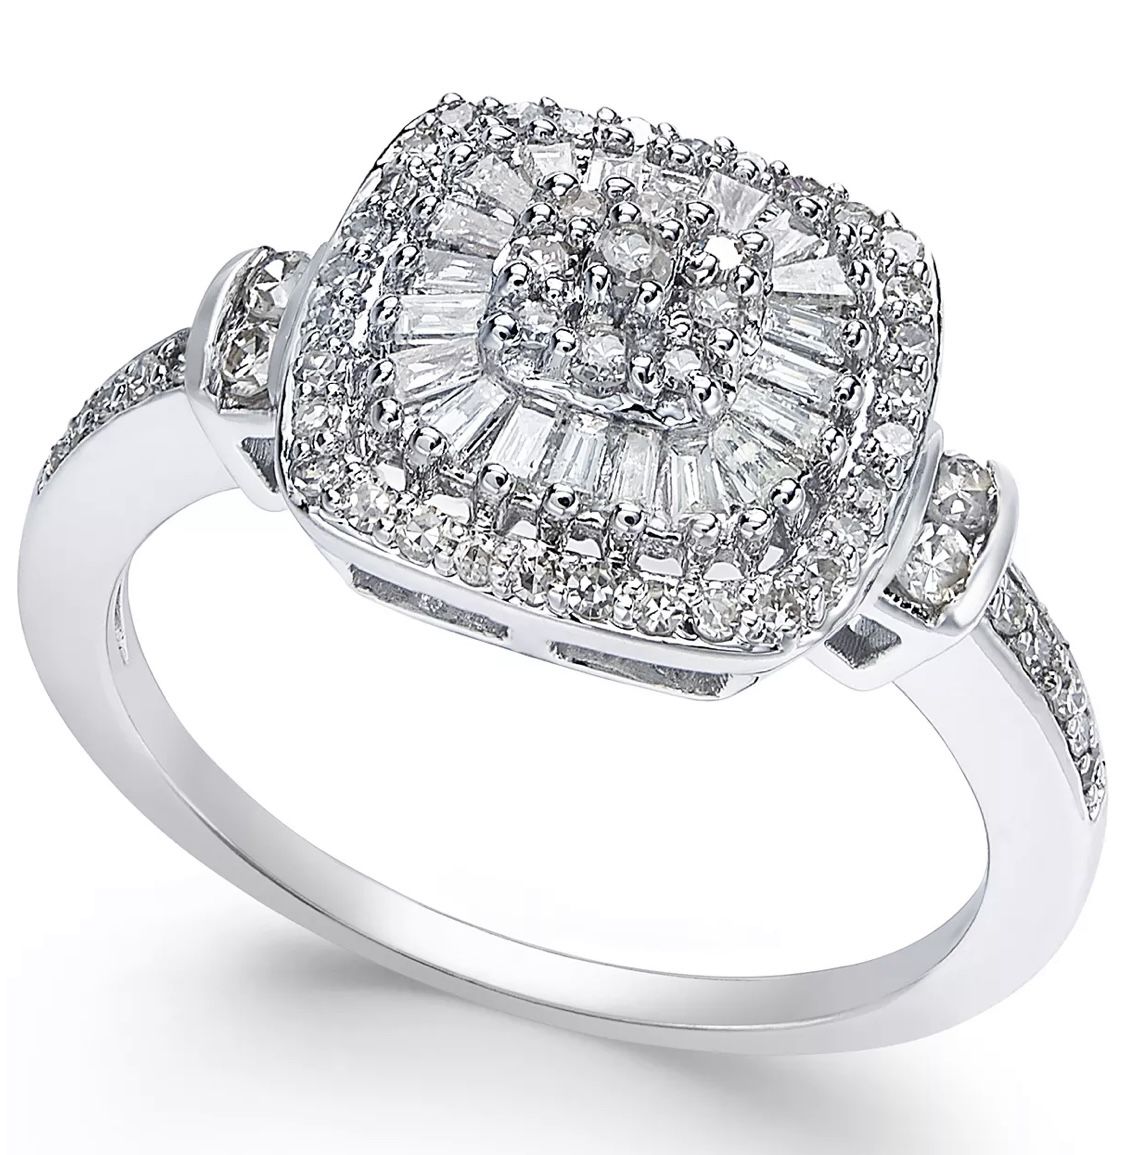 Diamond Vintage Inspired Ring (1/2 ct. t.w.) in 14k White Gold Size 7 